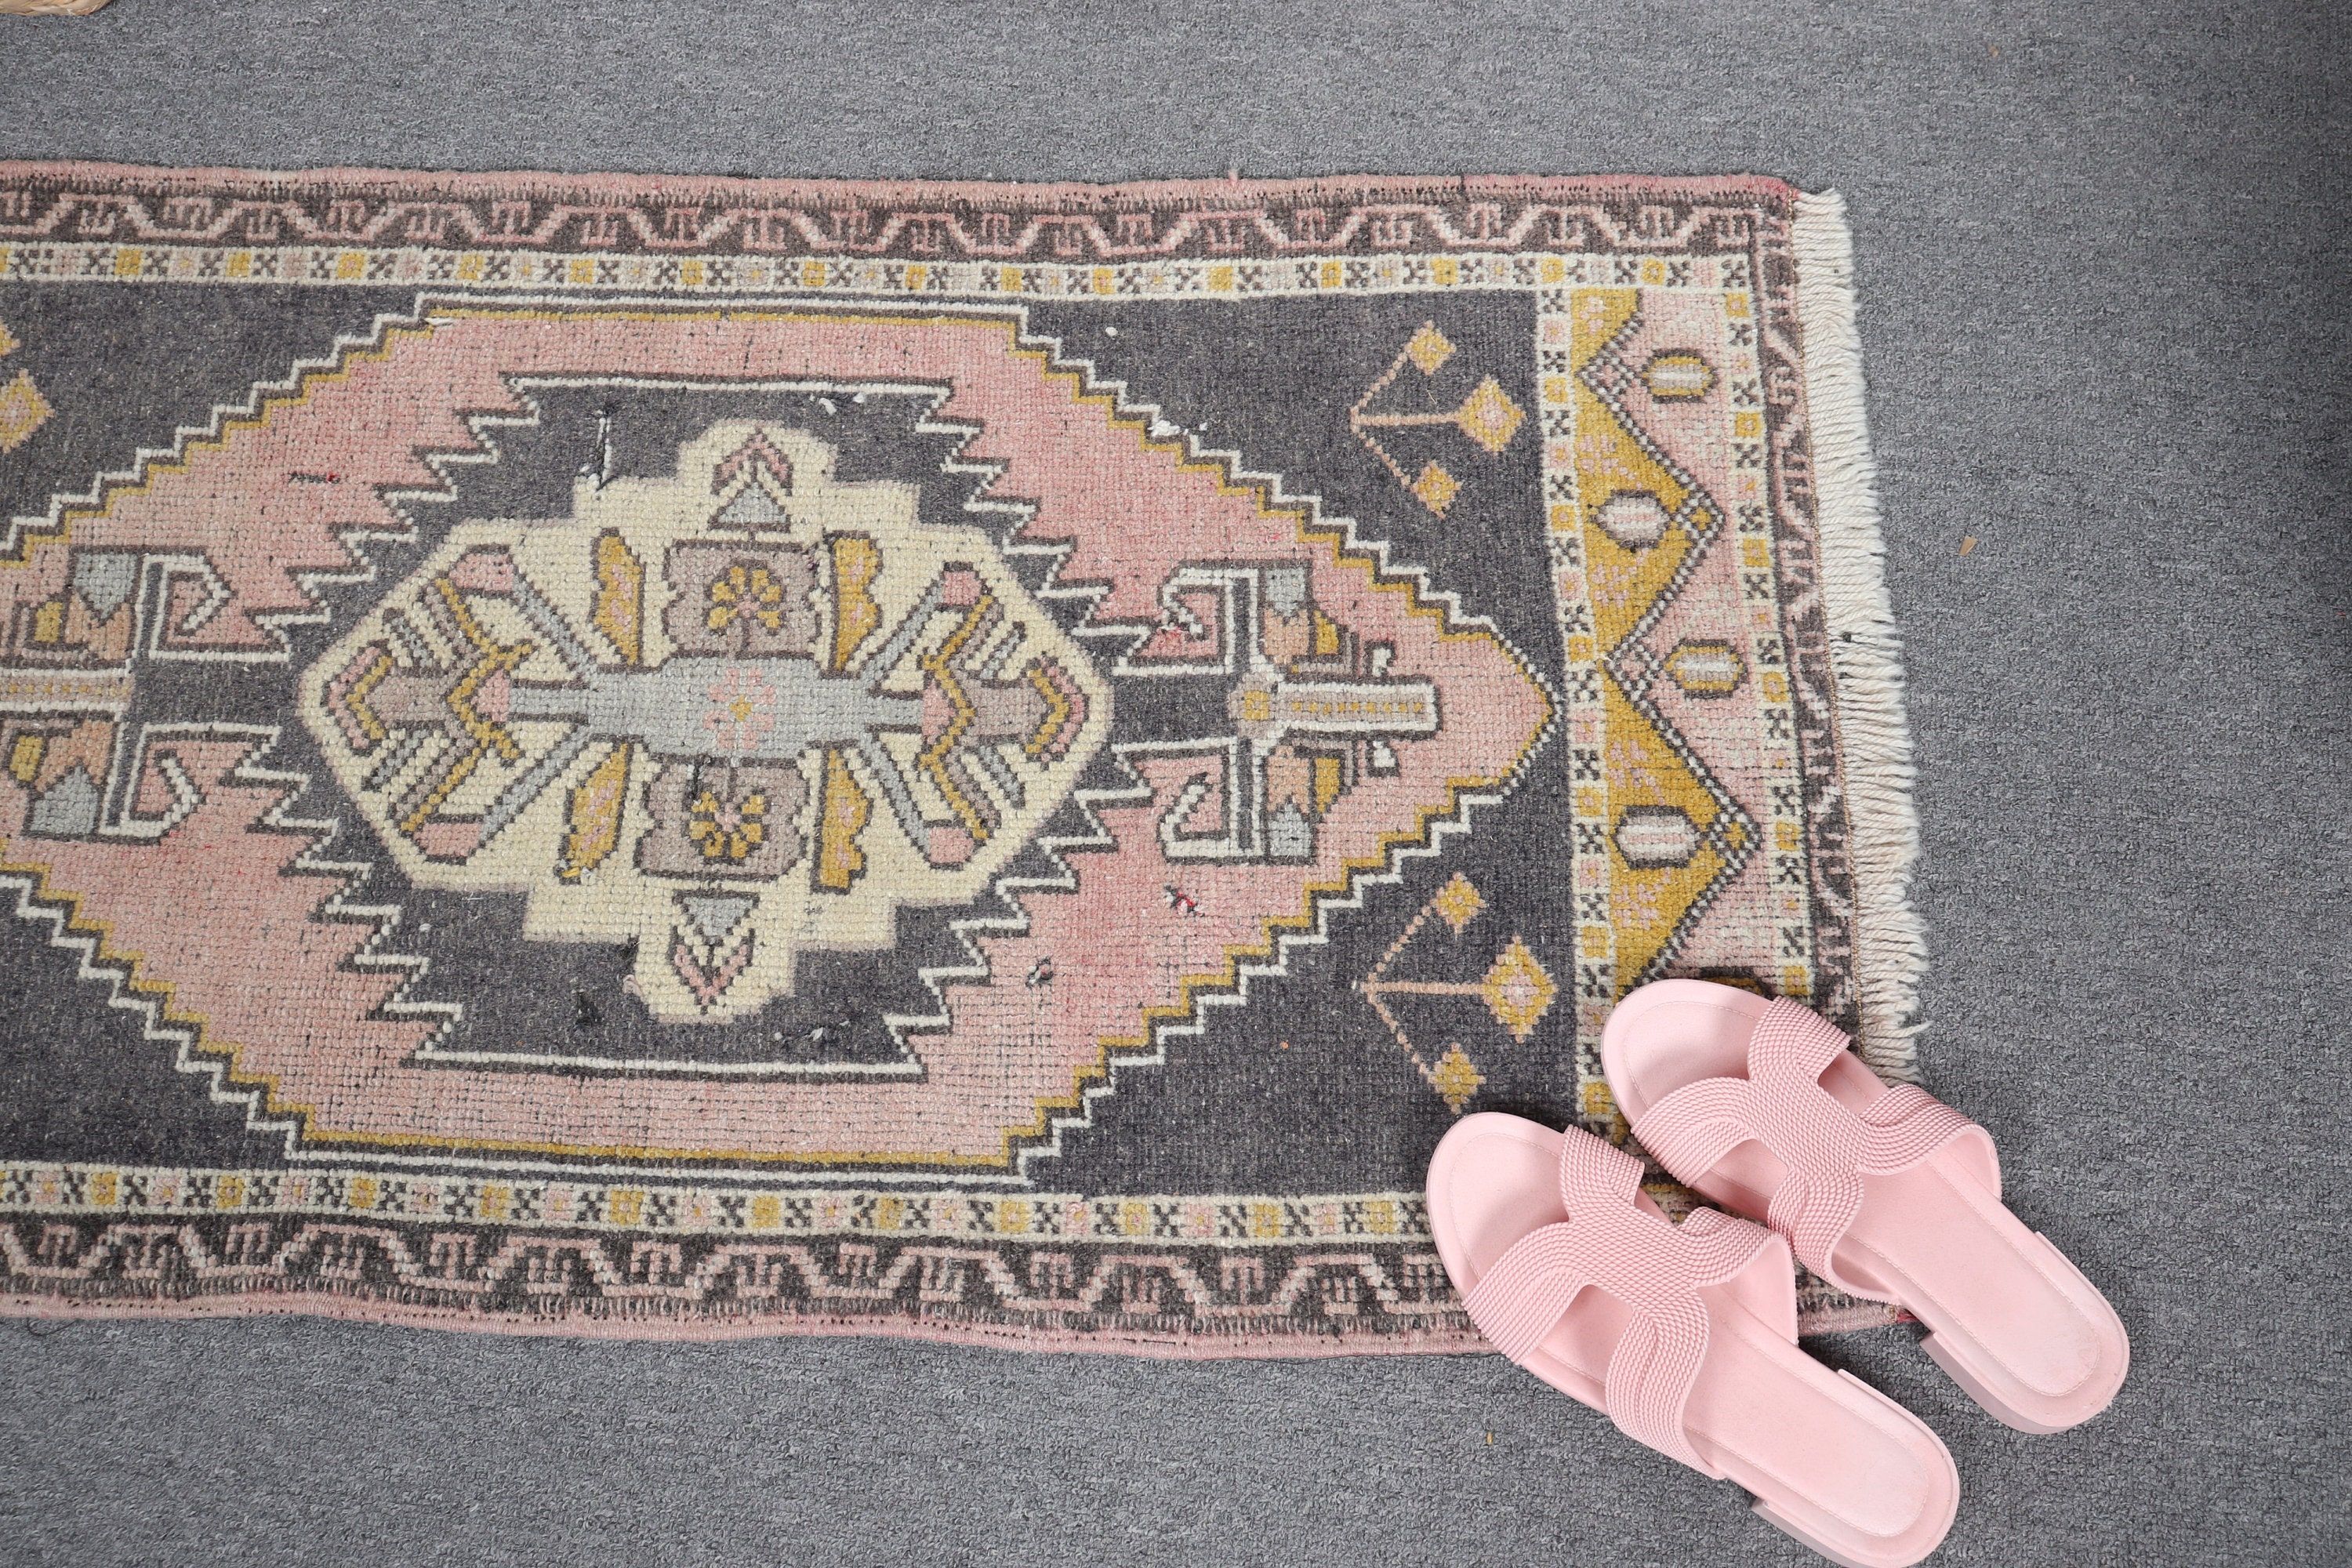 Entry Rug, Rugs for Bathroom, Turkish Rug, Bedroom Rugs, Pink Home Decor Rugs, Cool Rugs, 1.8x3.3 ft Small Rug, Vintage Rug